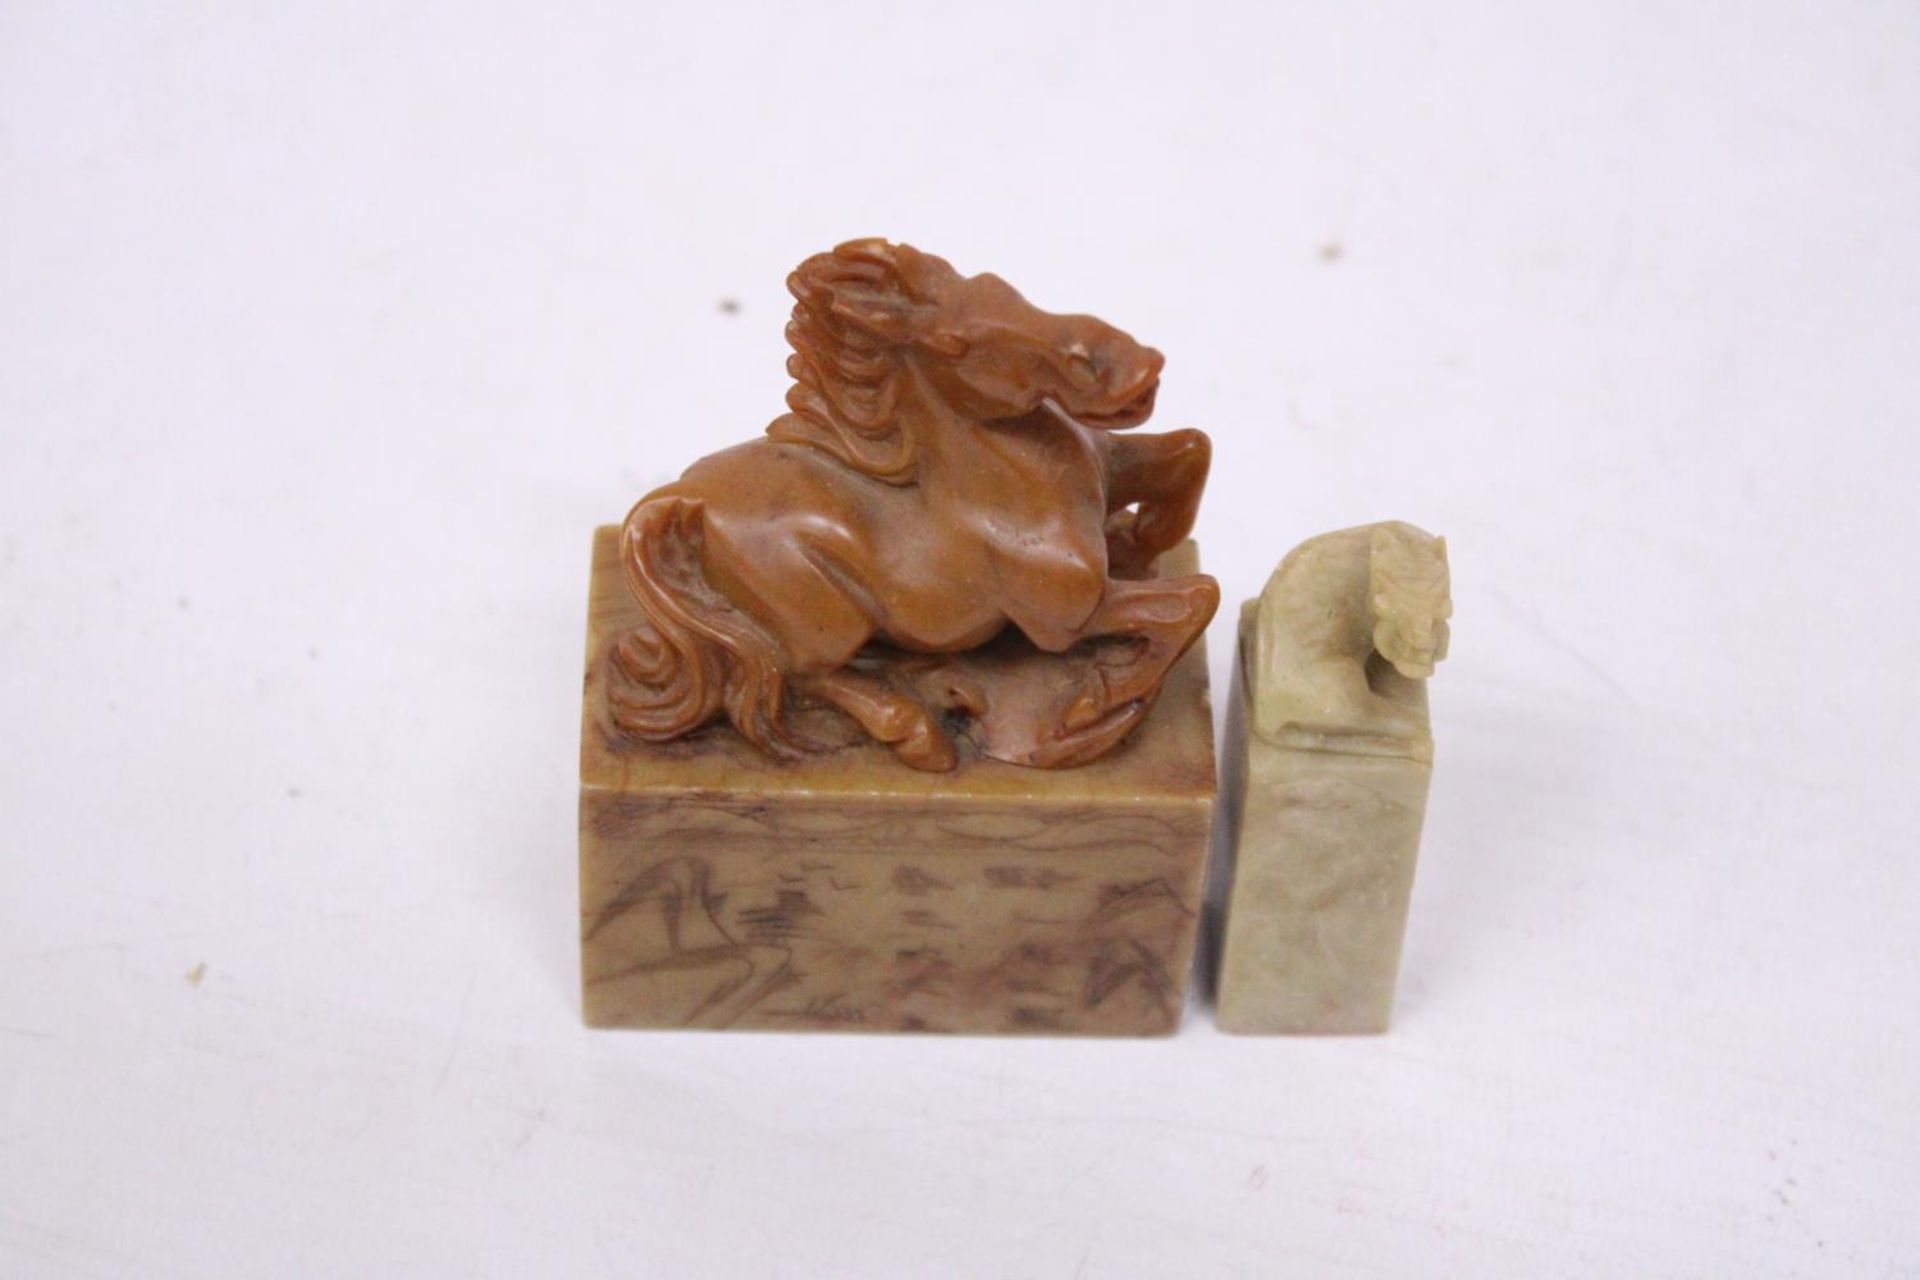 A CHINESE CARVED SOAPSTONE SEAL DEPICTING A REARING HORSE TOGETHER WITH A LION SEAL CARVING - Image 6 of 6